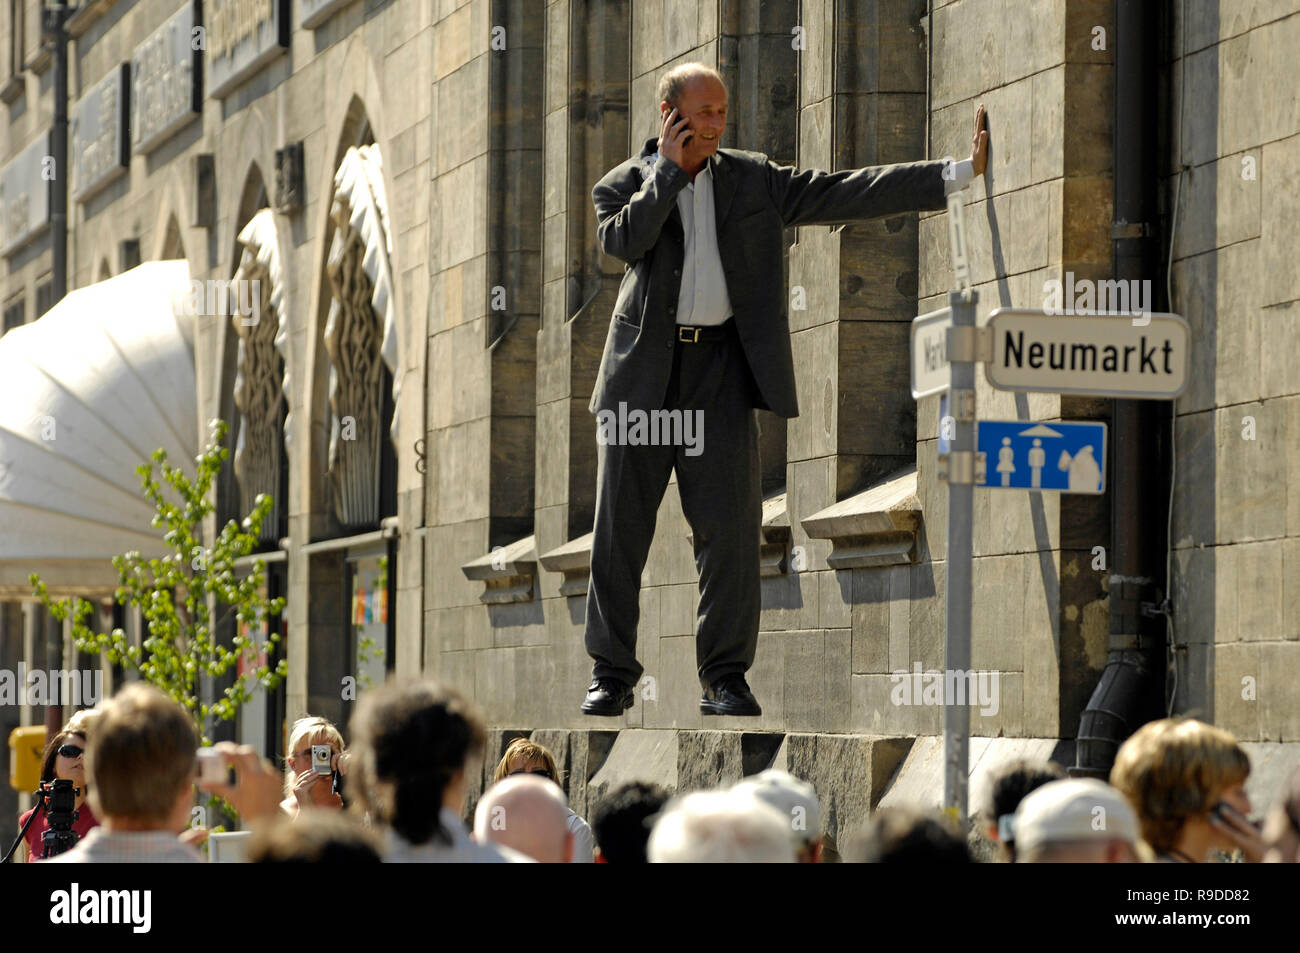 27.04.2007, Chemnitz, Saxony, Germany - Action artist Johan Lorbeer seems to float during a performance at the city hall of Chemnitz. 0UX070427D464CAR Stock Photo